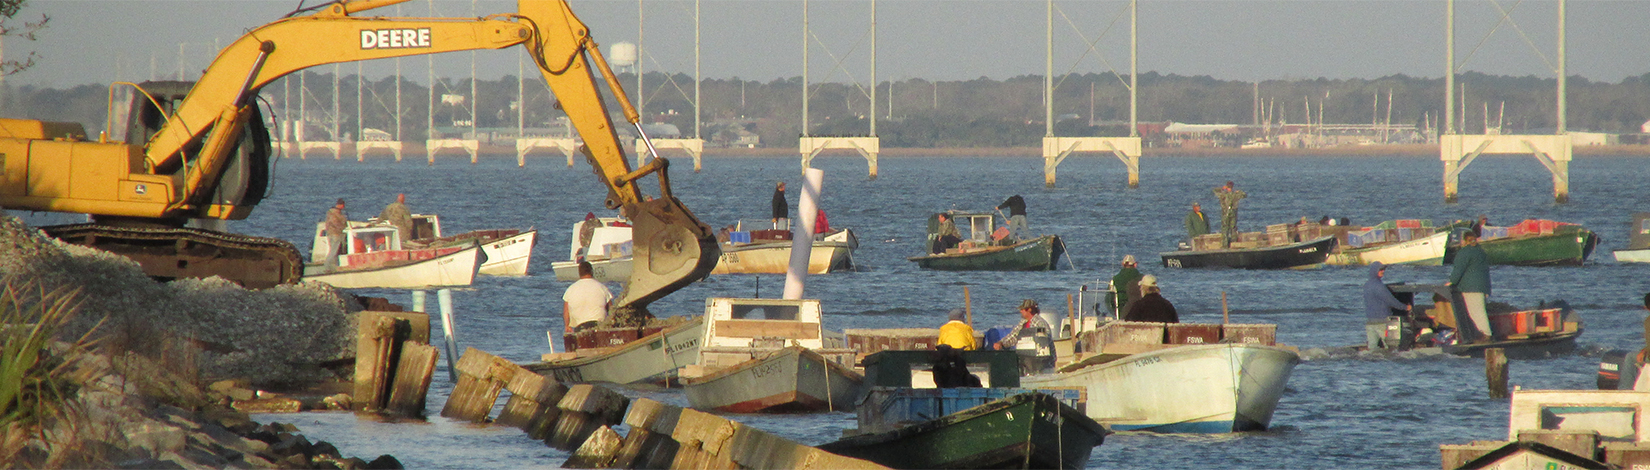 Crane with oyster boats 